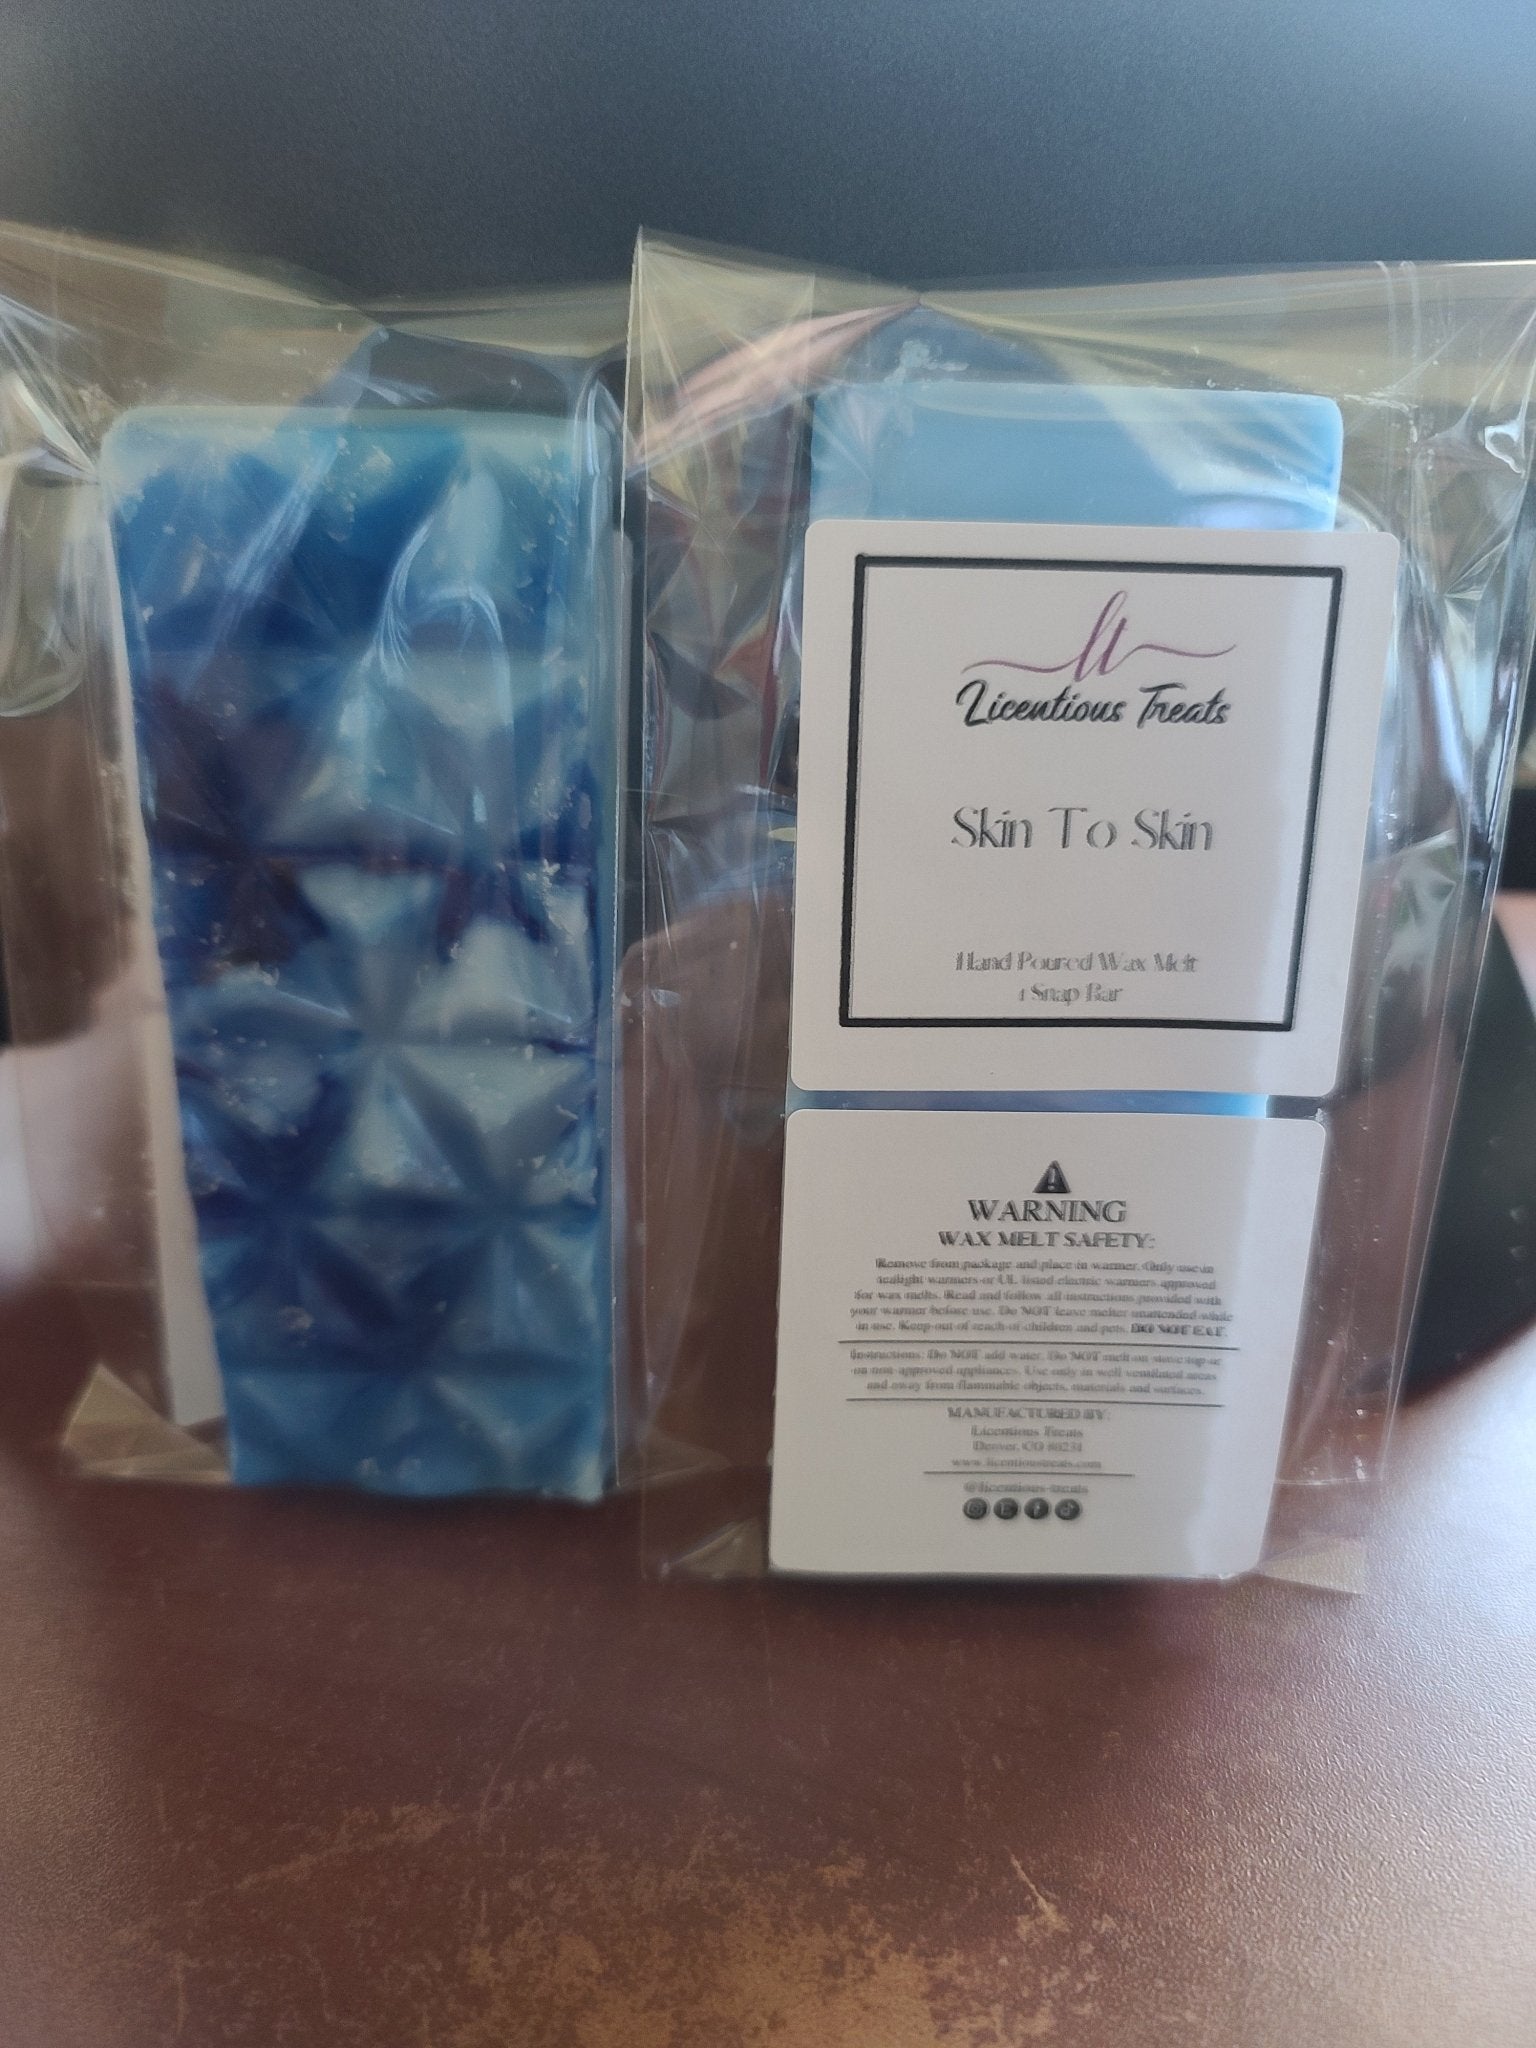 Wax Melts - Skin To Skin - Licentious TreatsWax Melts - Skin To Skin